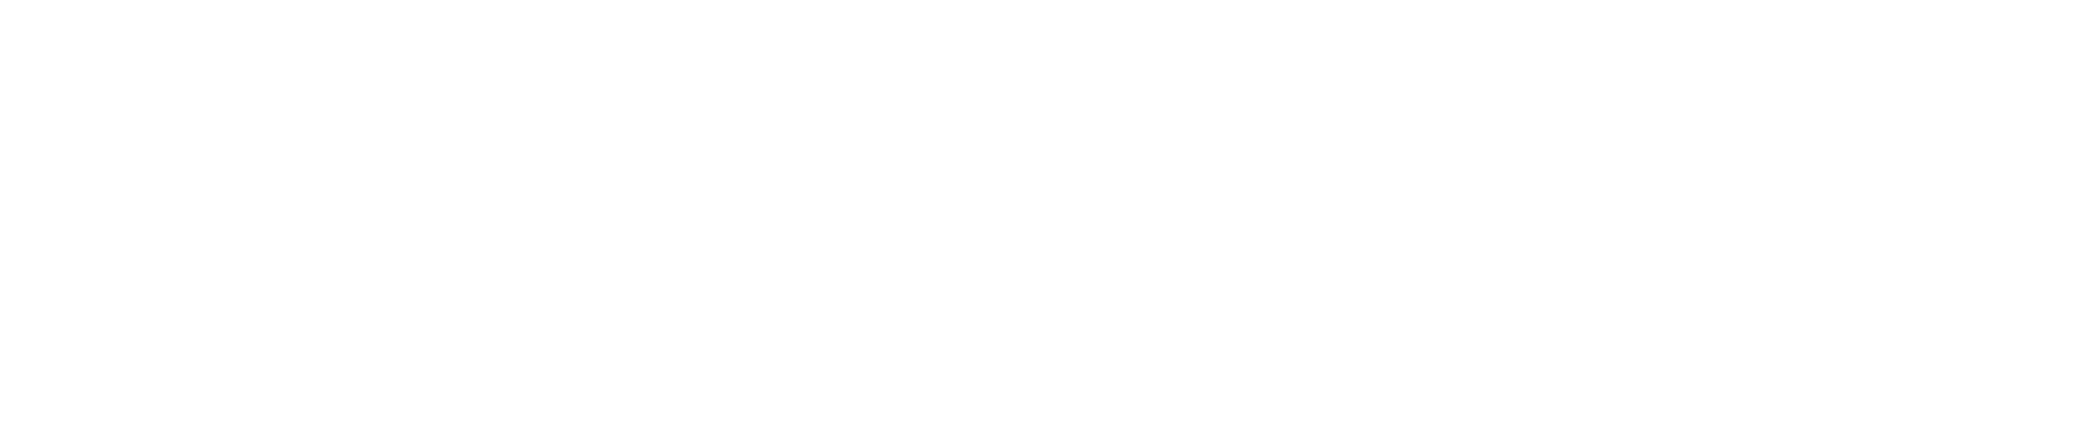 Haiku is a short poem born in Japan. Haiku has become a world literature that is loved and spread in over 50 countries.Matsuo Basho is the founder of haiku and is the most important haiku poet in its history. This is a new card game that separates Basho’s haiku into three,mixes and combines. Would you like to play with this and experience Japanese culture?